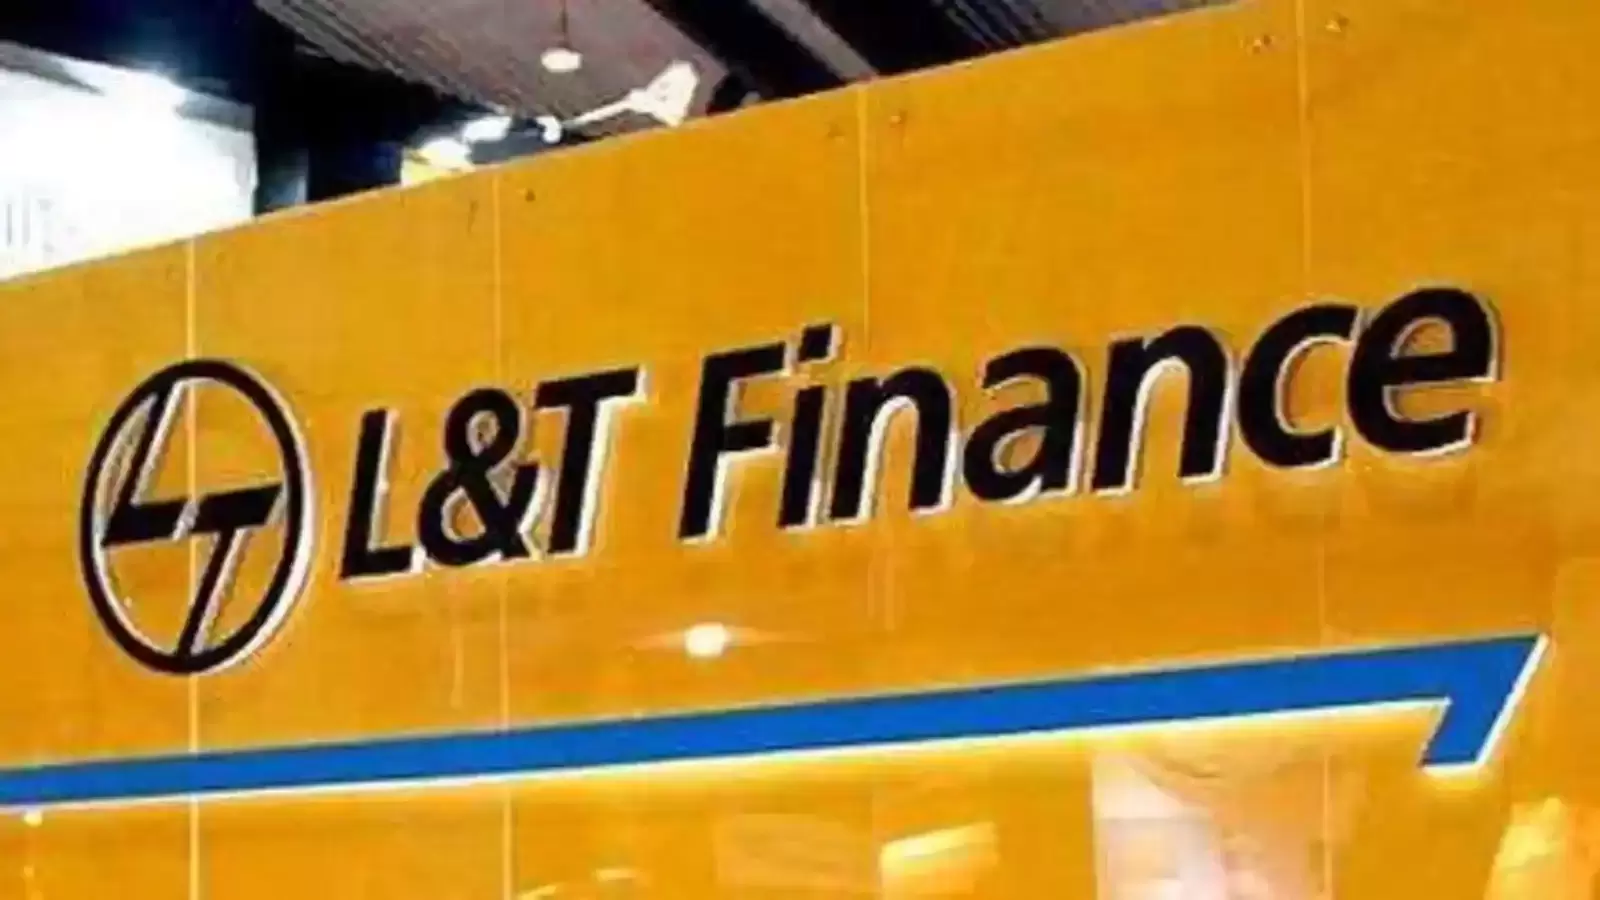 L&T Finance shares rise 5% as Bain likely exits after 8.82 crore shares change hands